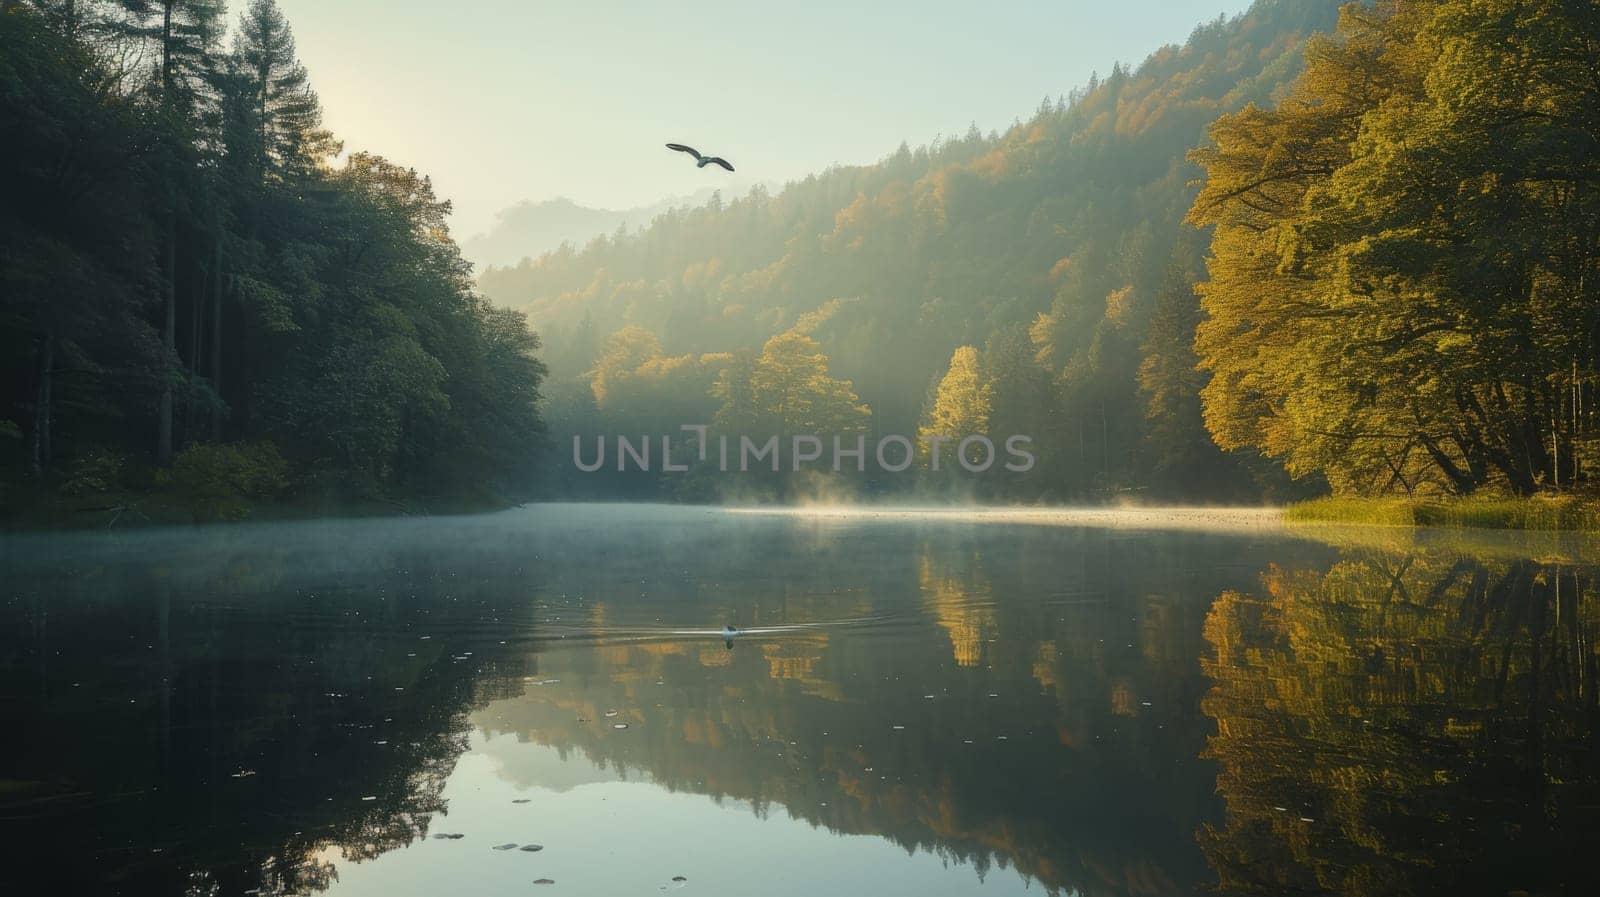 A lake with a bird flying over it and trees in the background, AI by starush